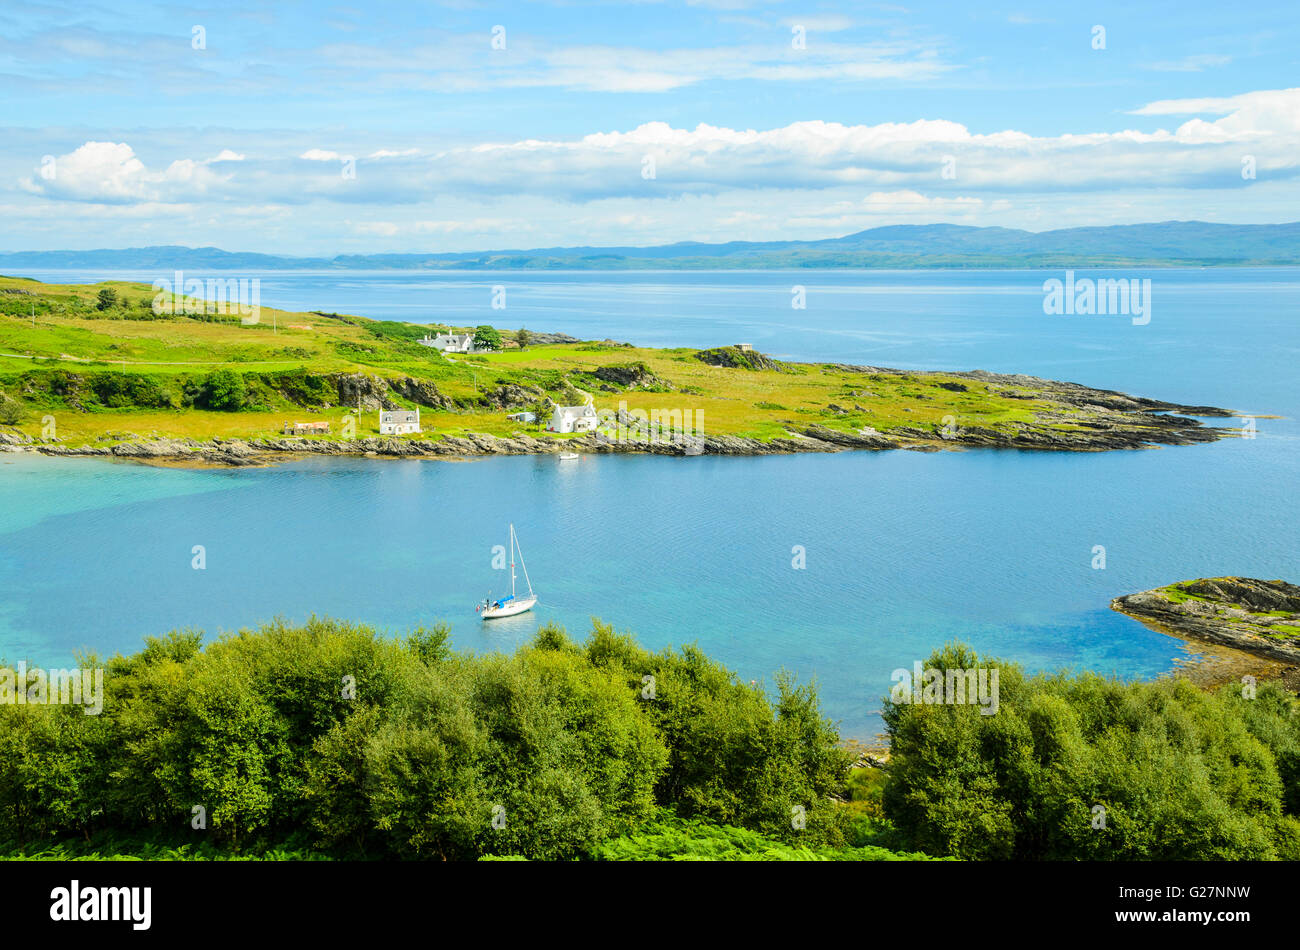 View over Tarbert Bay on the island of Jura Scotland looking across the Sound of Jura to Knapdale Stock Photo